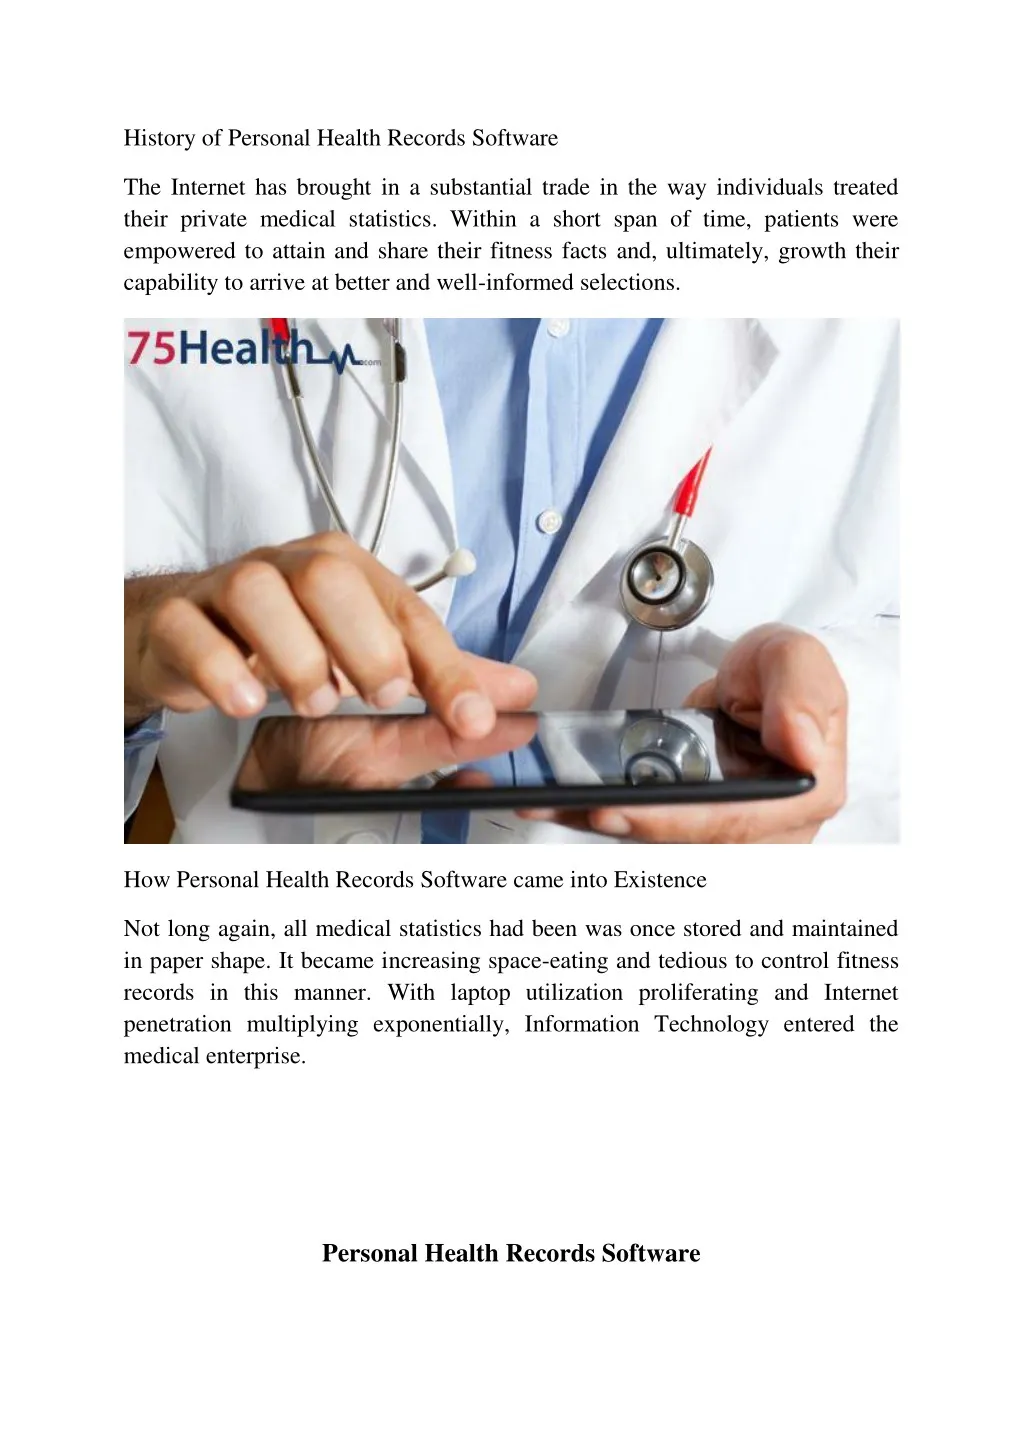 history of personal health records software